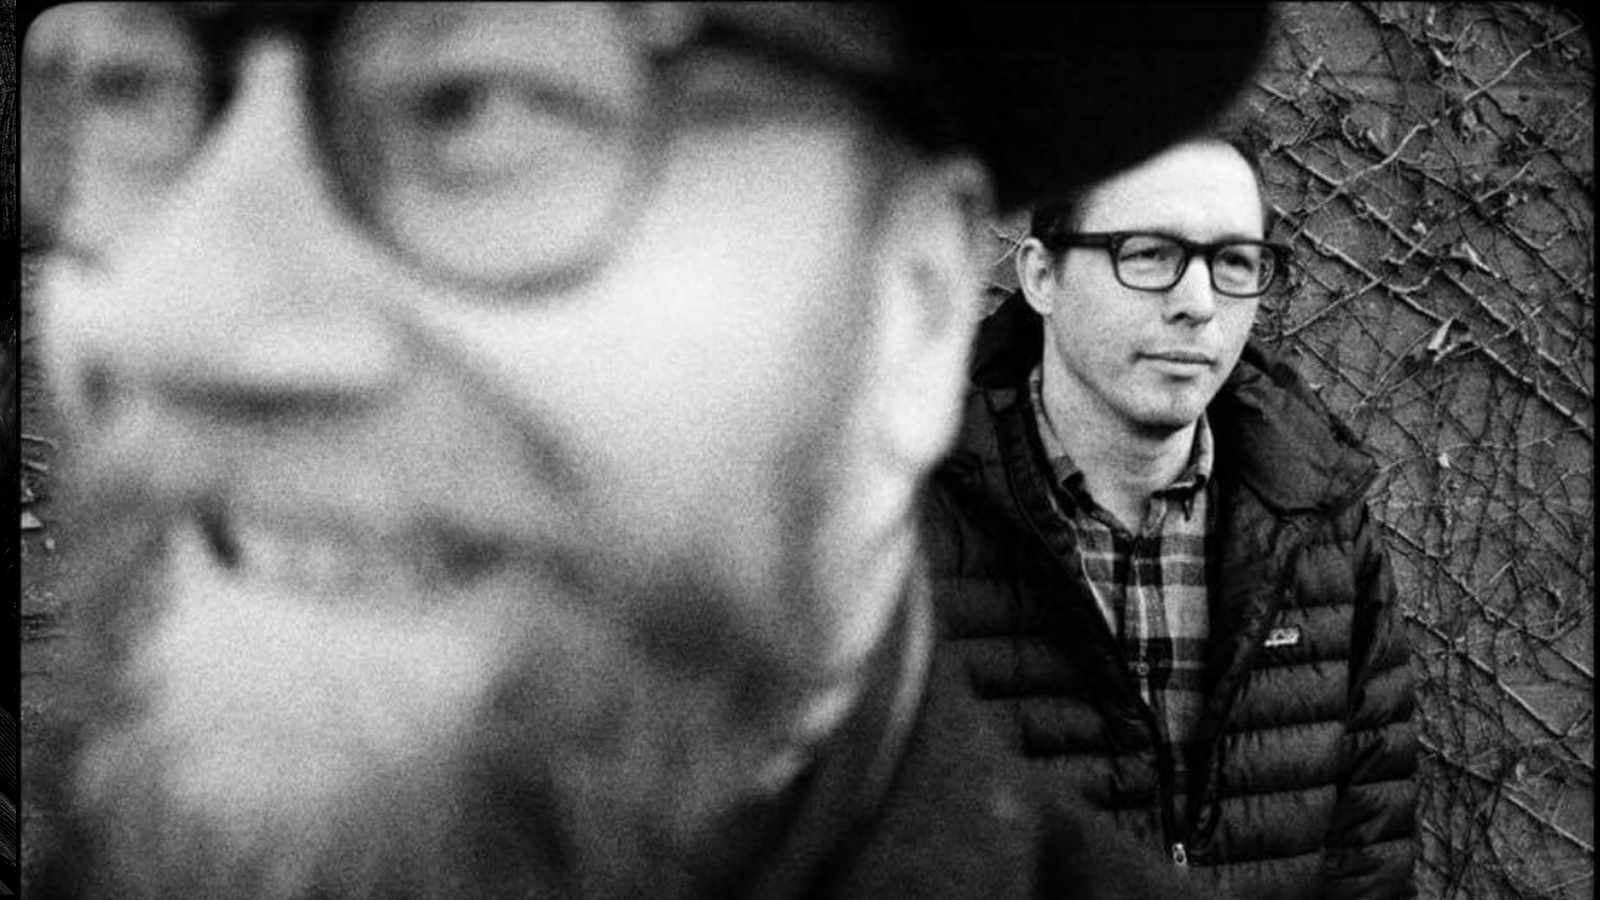 New Sounds: Mike Doughty’s Ghost of Vroom